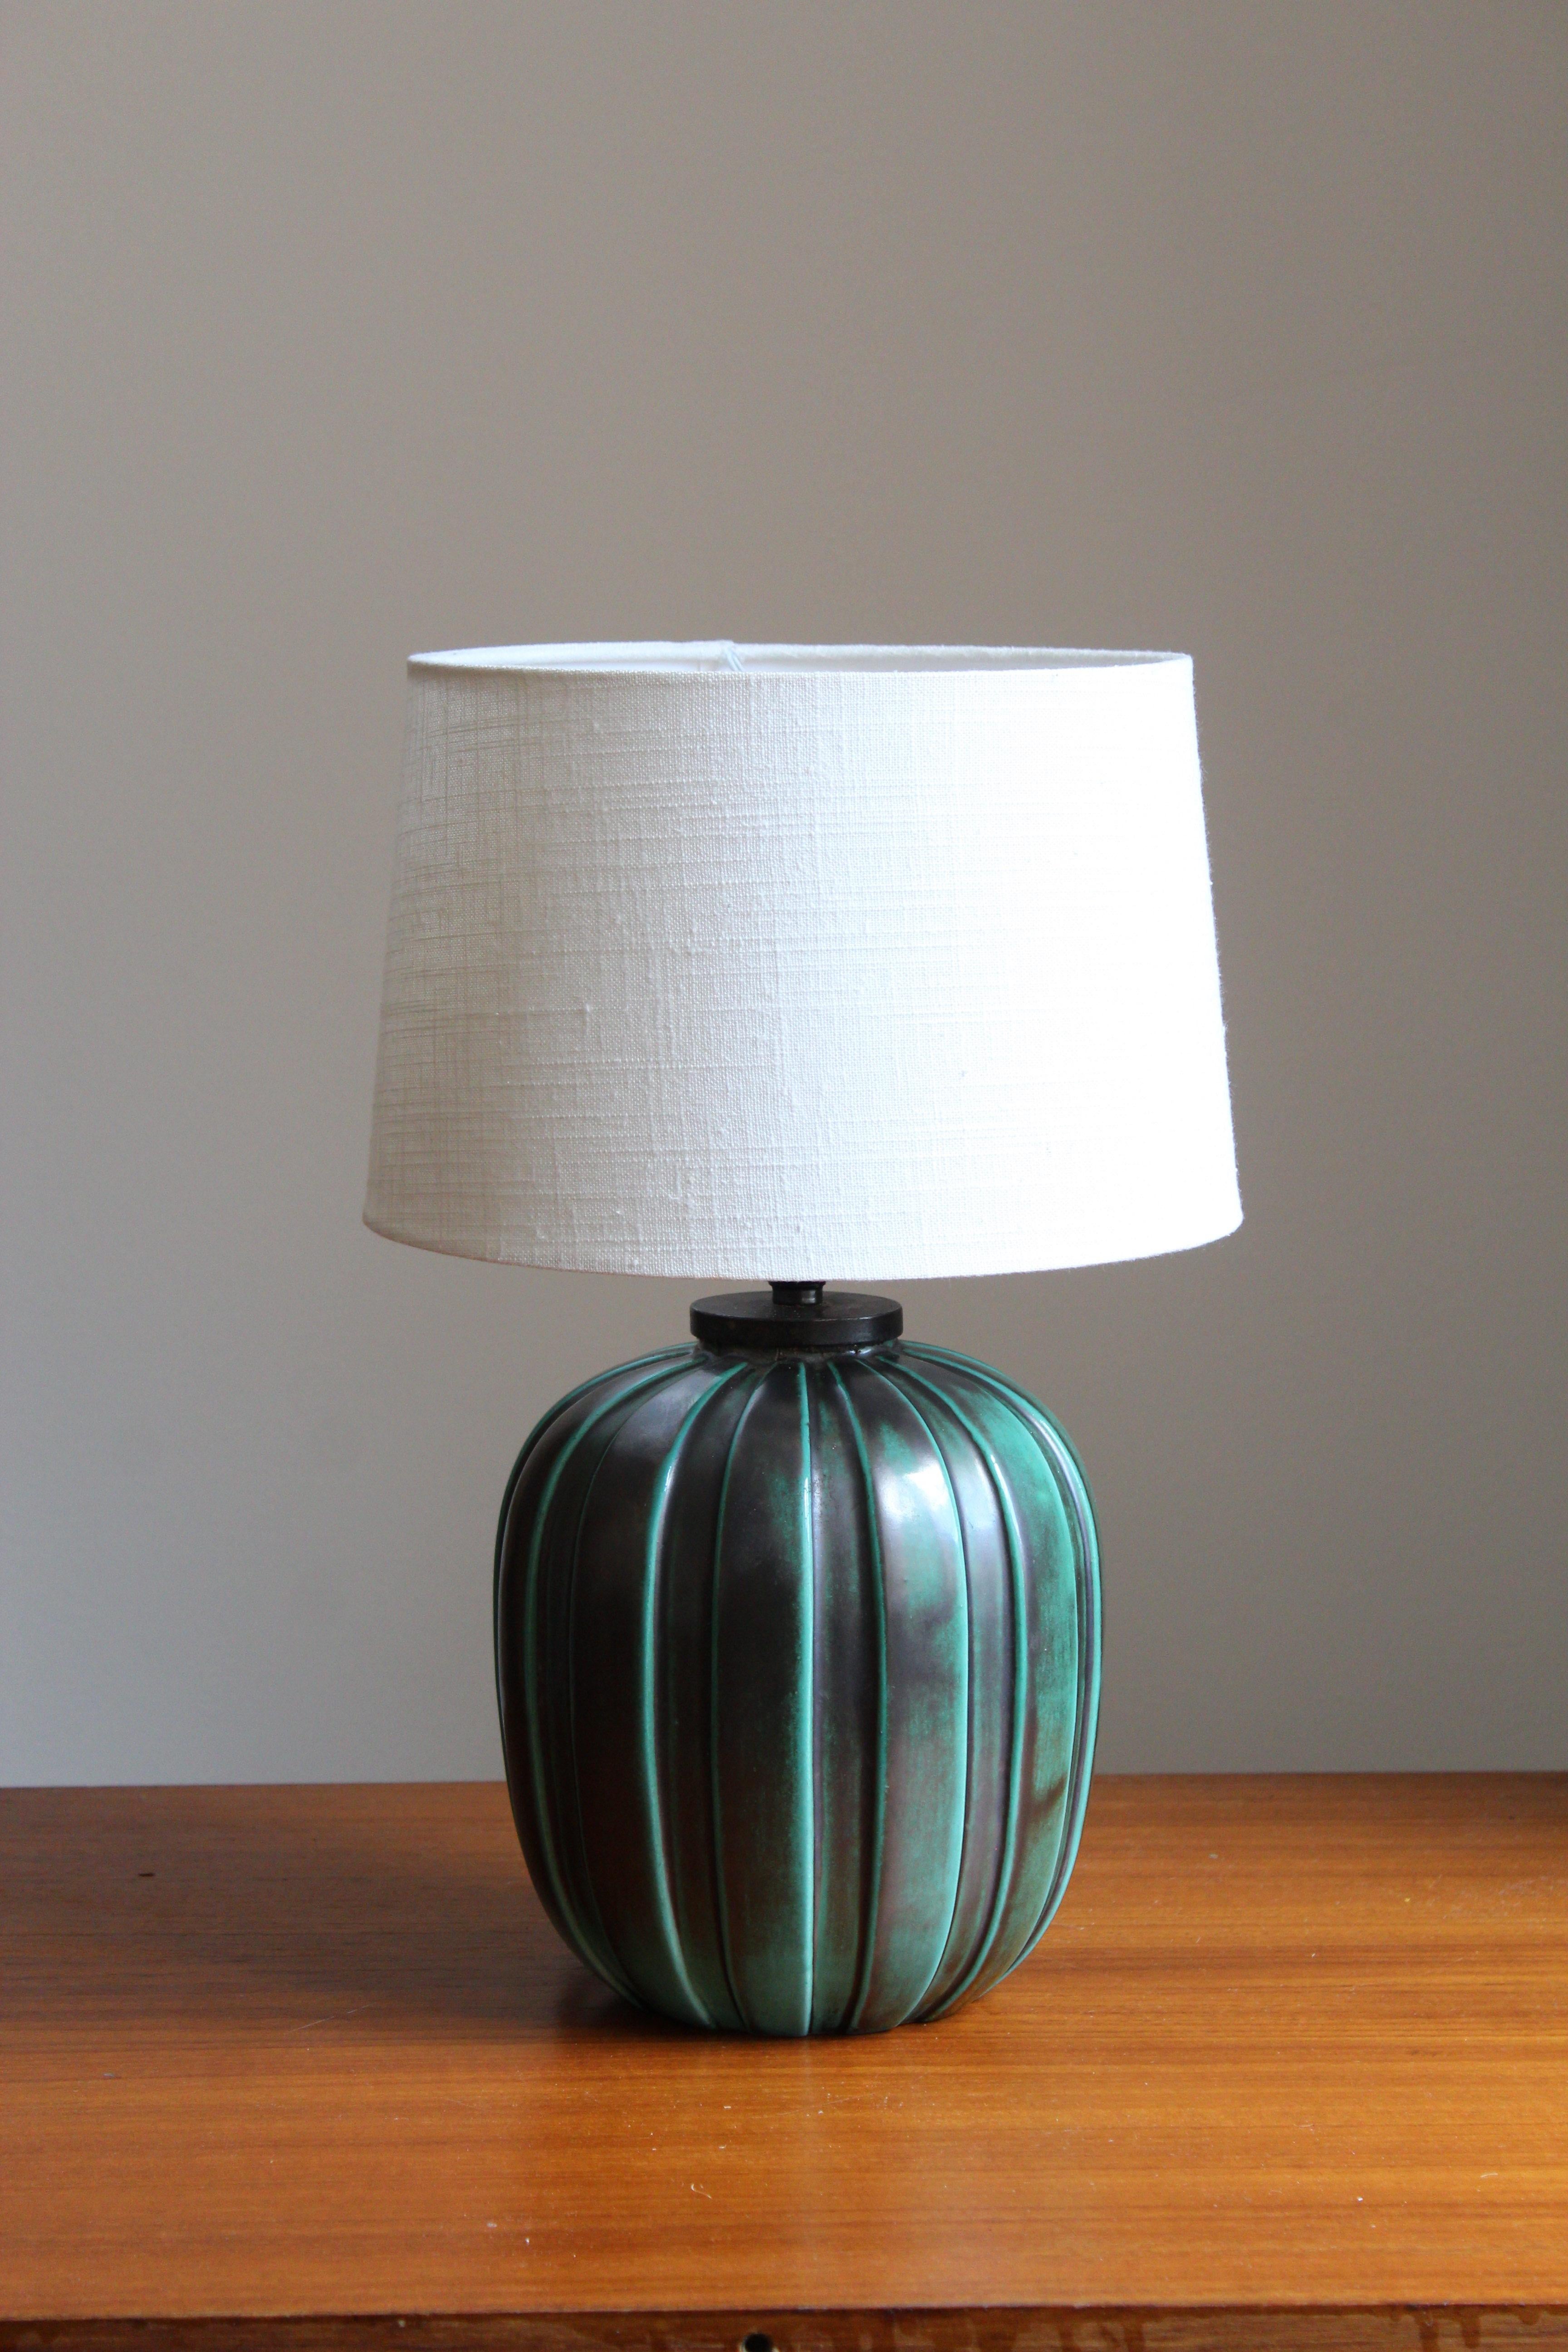 An early modernist table lamp. Designed by Vicke Lindstrand, for Upsala-Ekeby, Sweden, 1940s. Stamped and with production label.

Sold without lampshade, stated dimensions excluding lampshade.

Glaze features a blue-green color and black.

Other